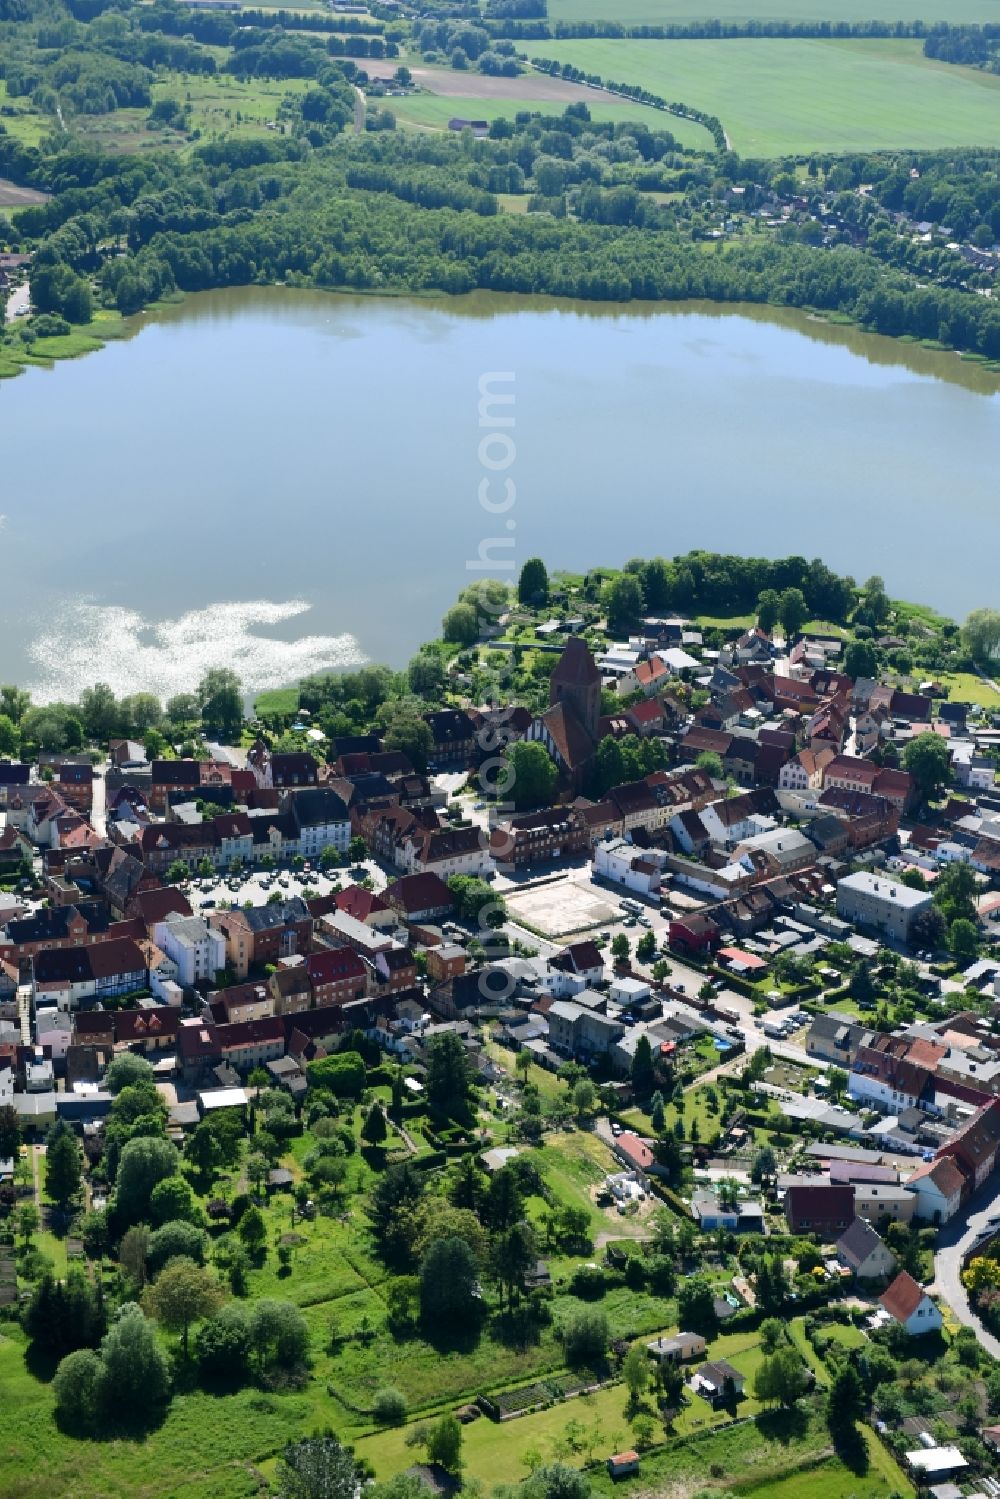 Aerial photograph Crivitz - City view on the Crivitzer lake in Crivitz in the state Mecklenburg - Western Pomerania, Germany